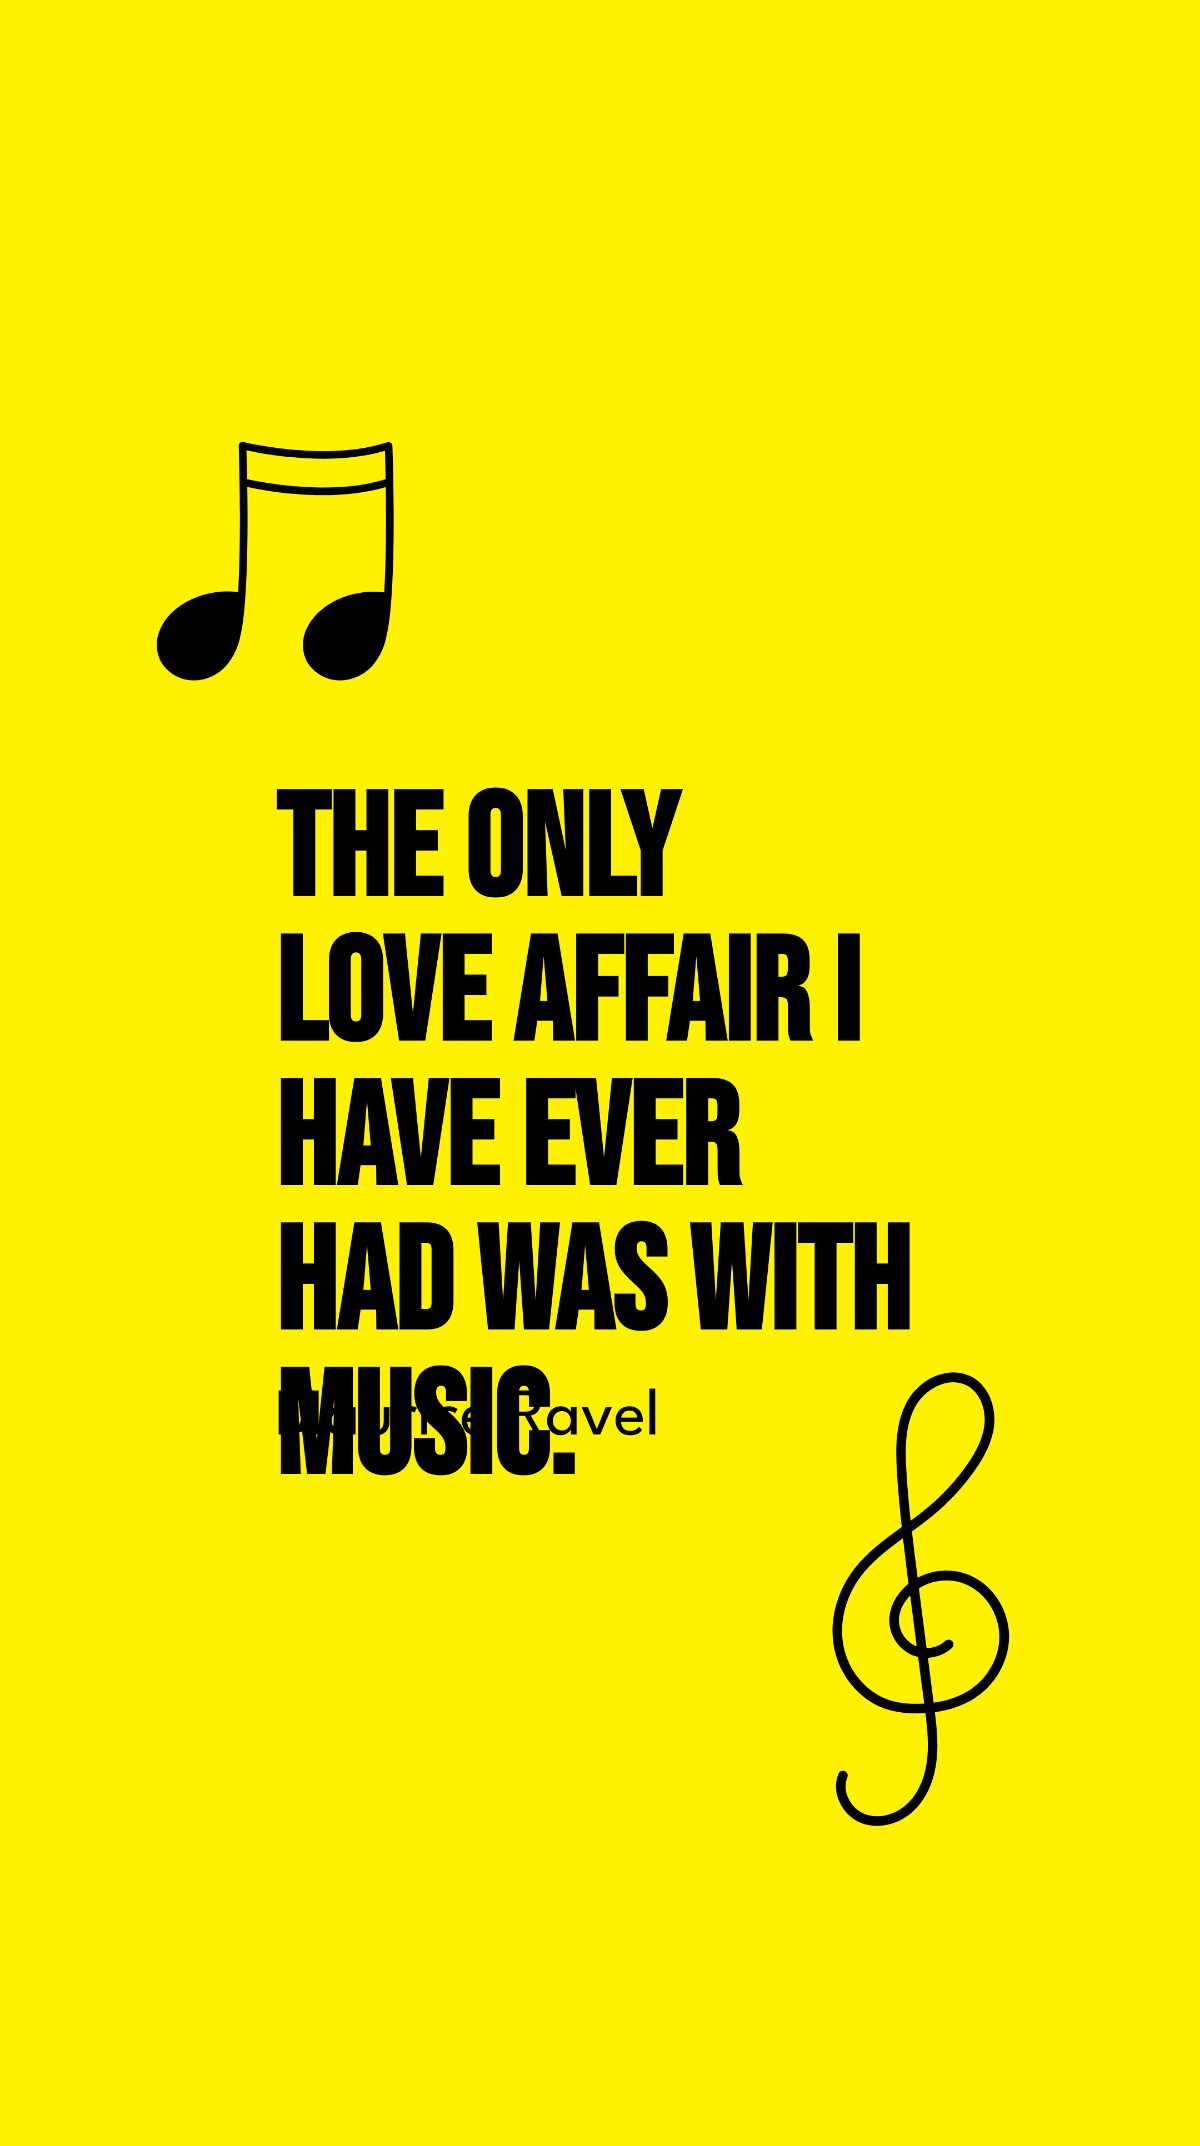 Maurice Ravel - The only love affair I have ever had was with music.